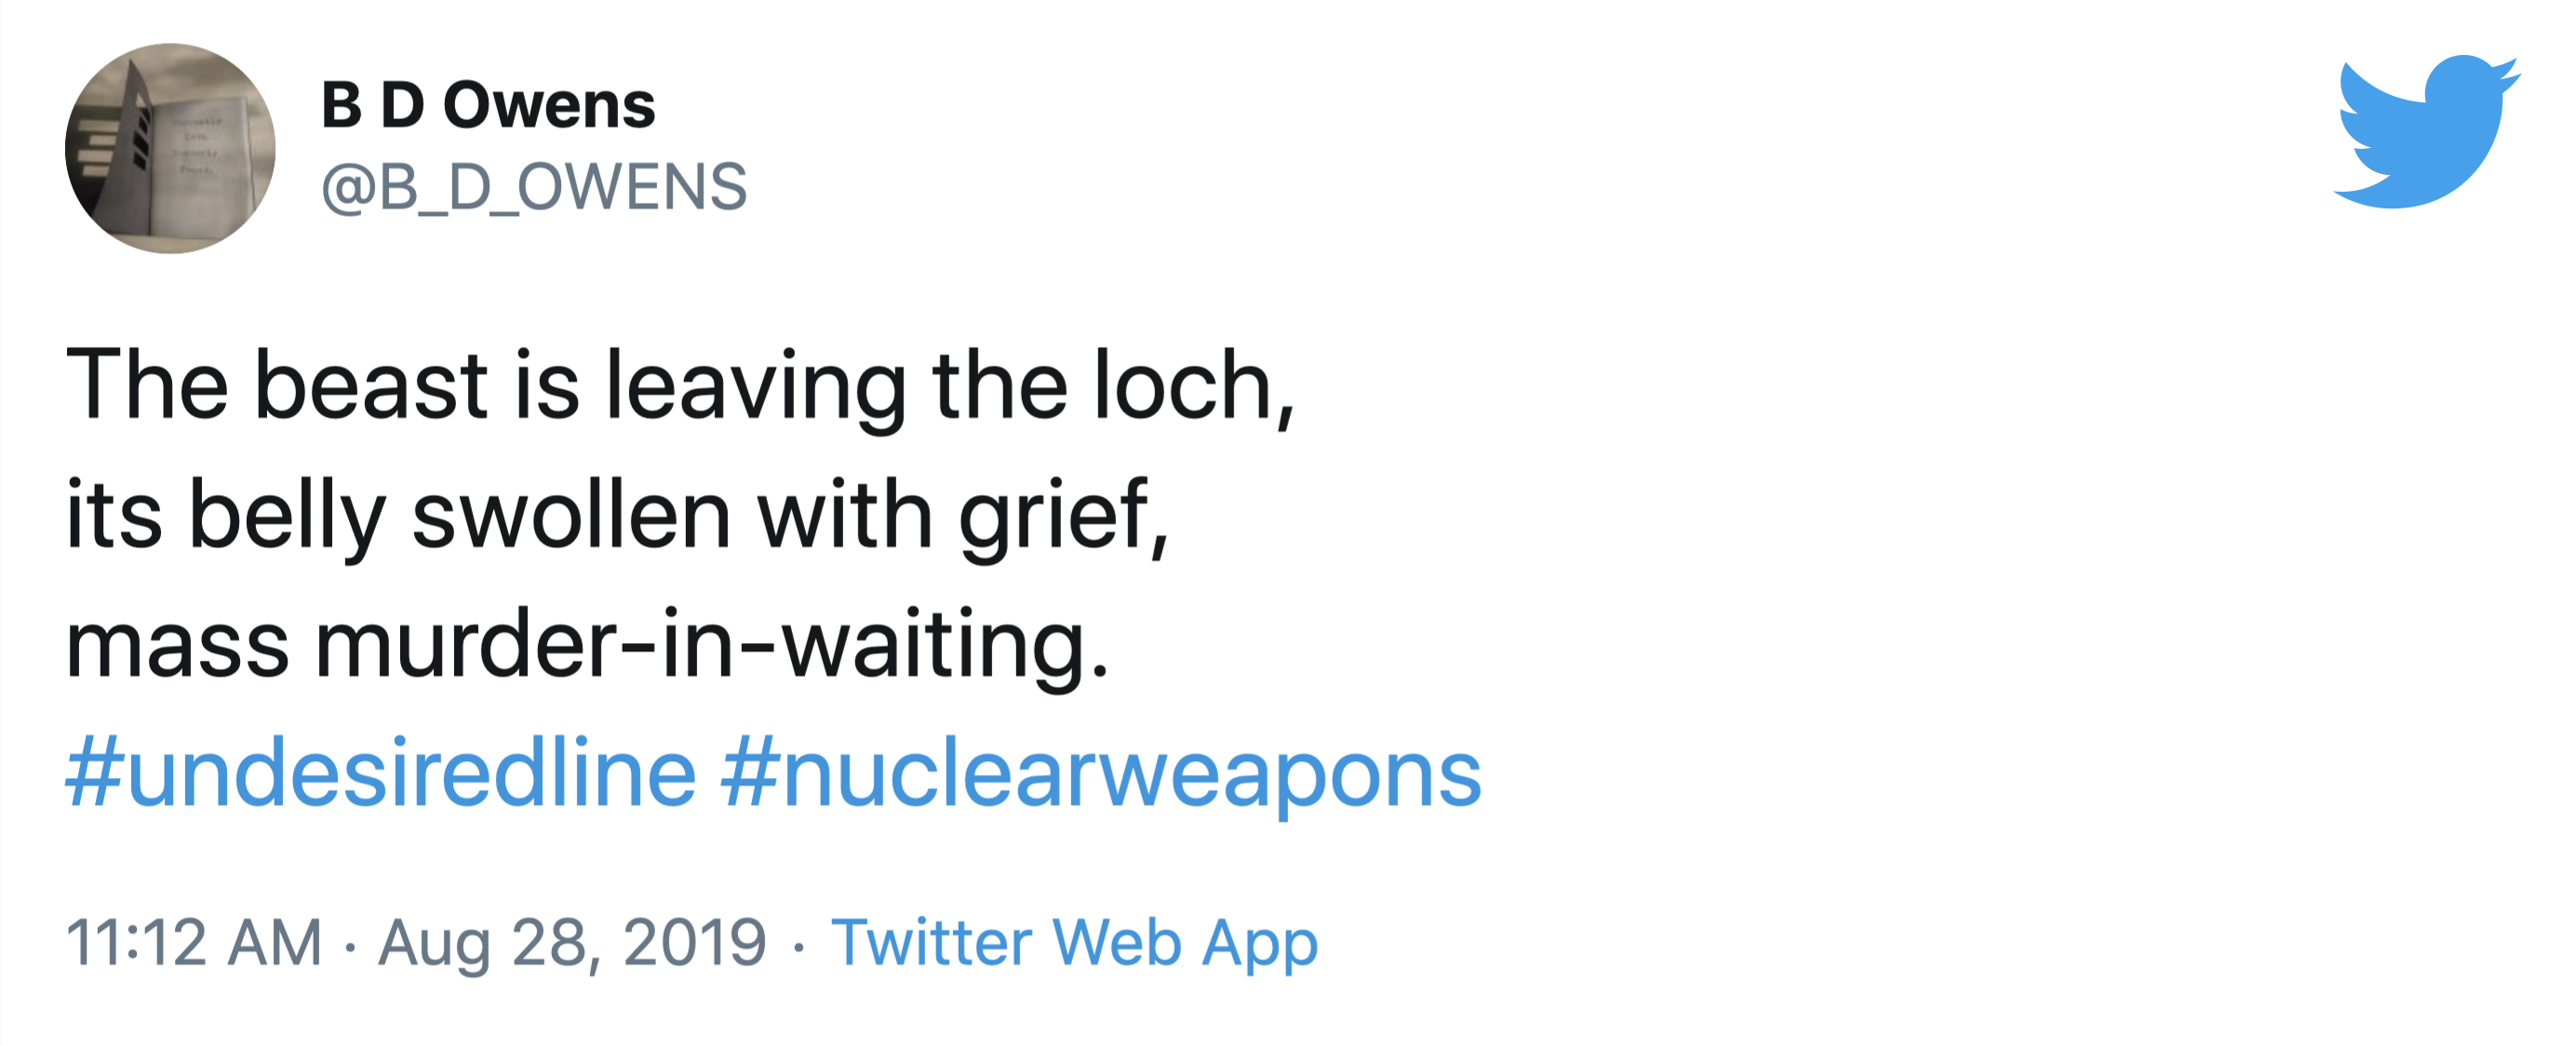 A tweet, by B.D. Owens, reads, "The beast is leaving the loch, its belly swollen with grief, mass murder-in-waiting." with the hashtags undesired line and nuclear weapons. It was posted at 11:12 AM on August 28, 2019.